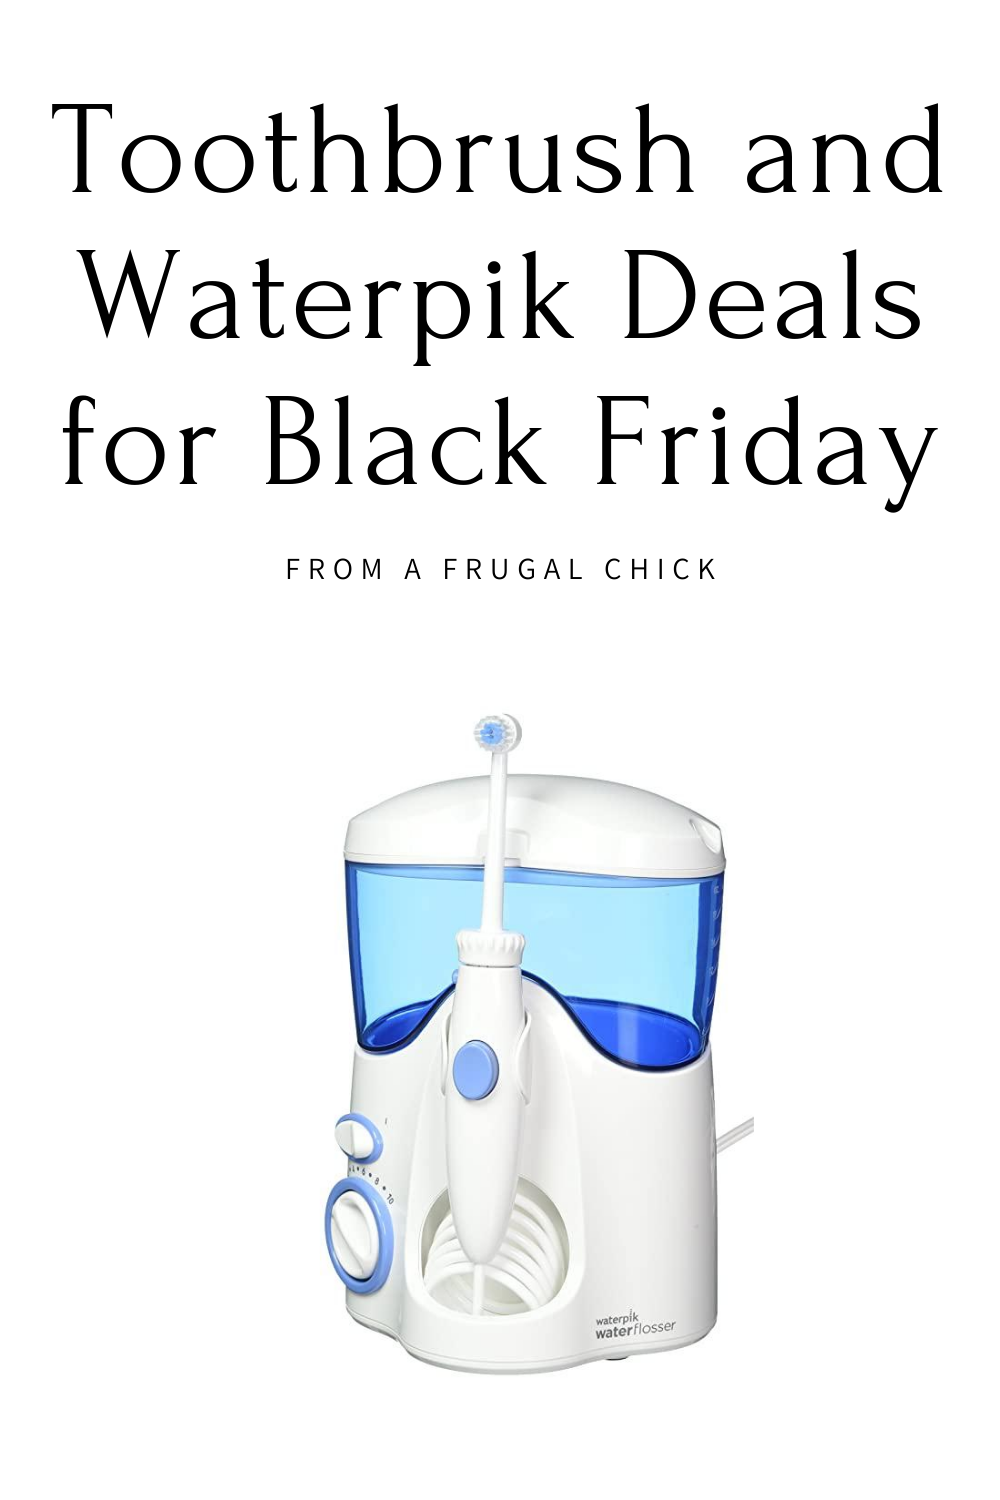 Toothbrush and Waterpik Black Friday Deals- find the prices for Waterpiks and Toothbrushes at all major retailers for Black Friday!